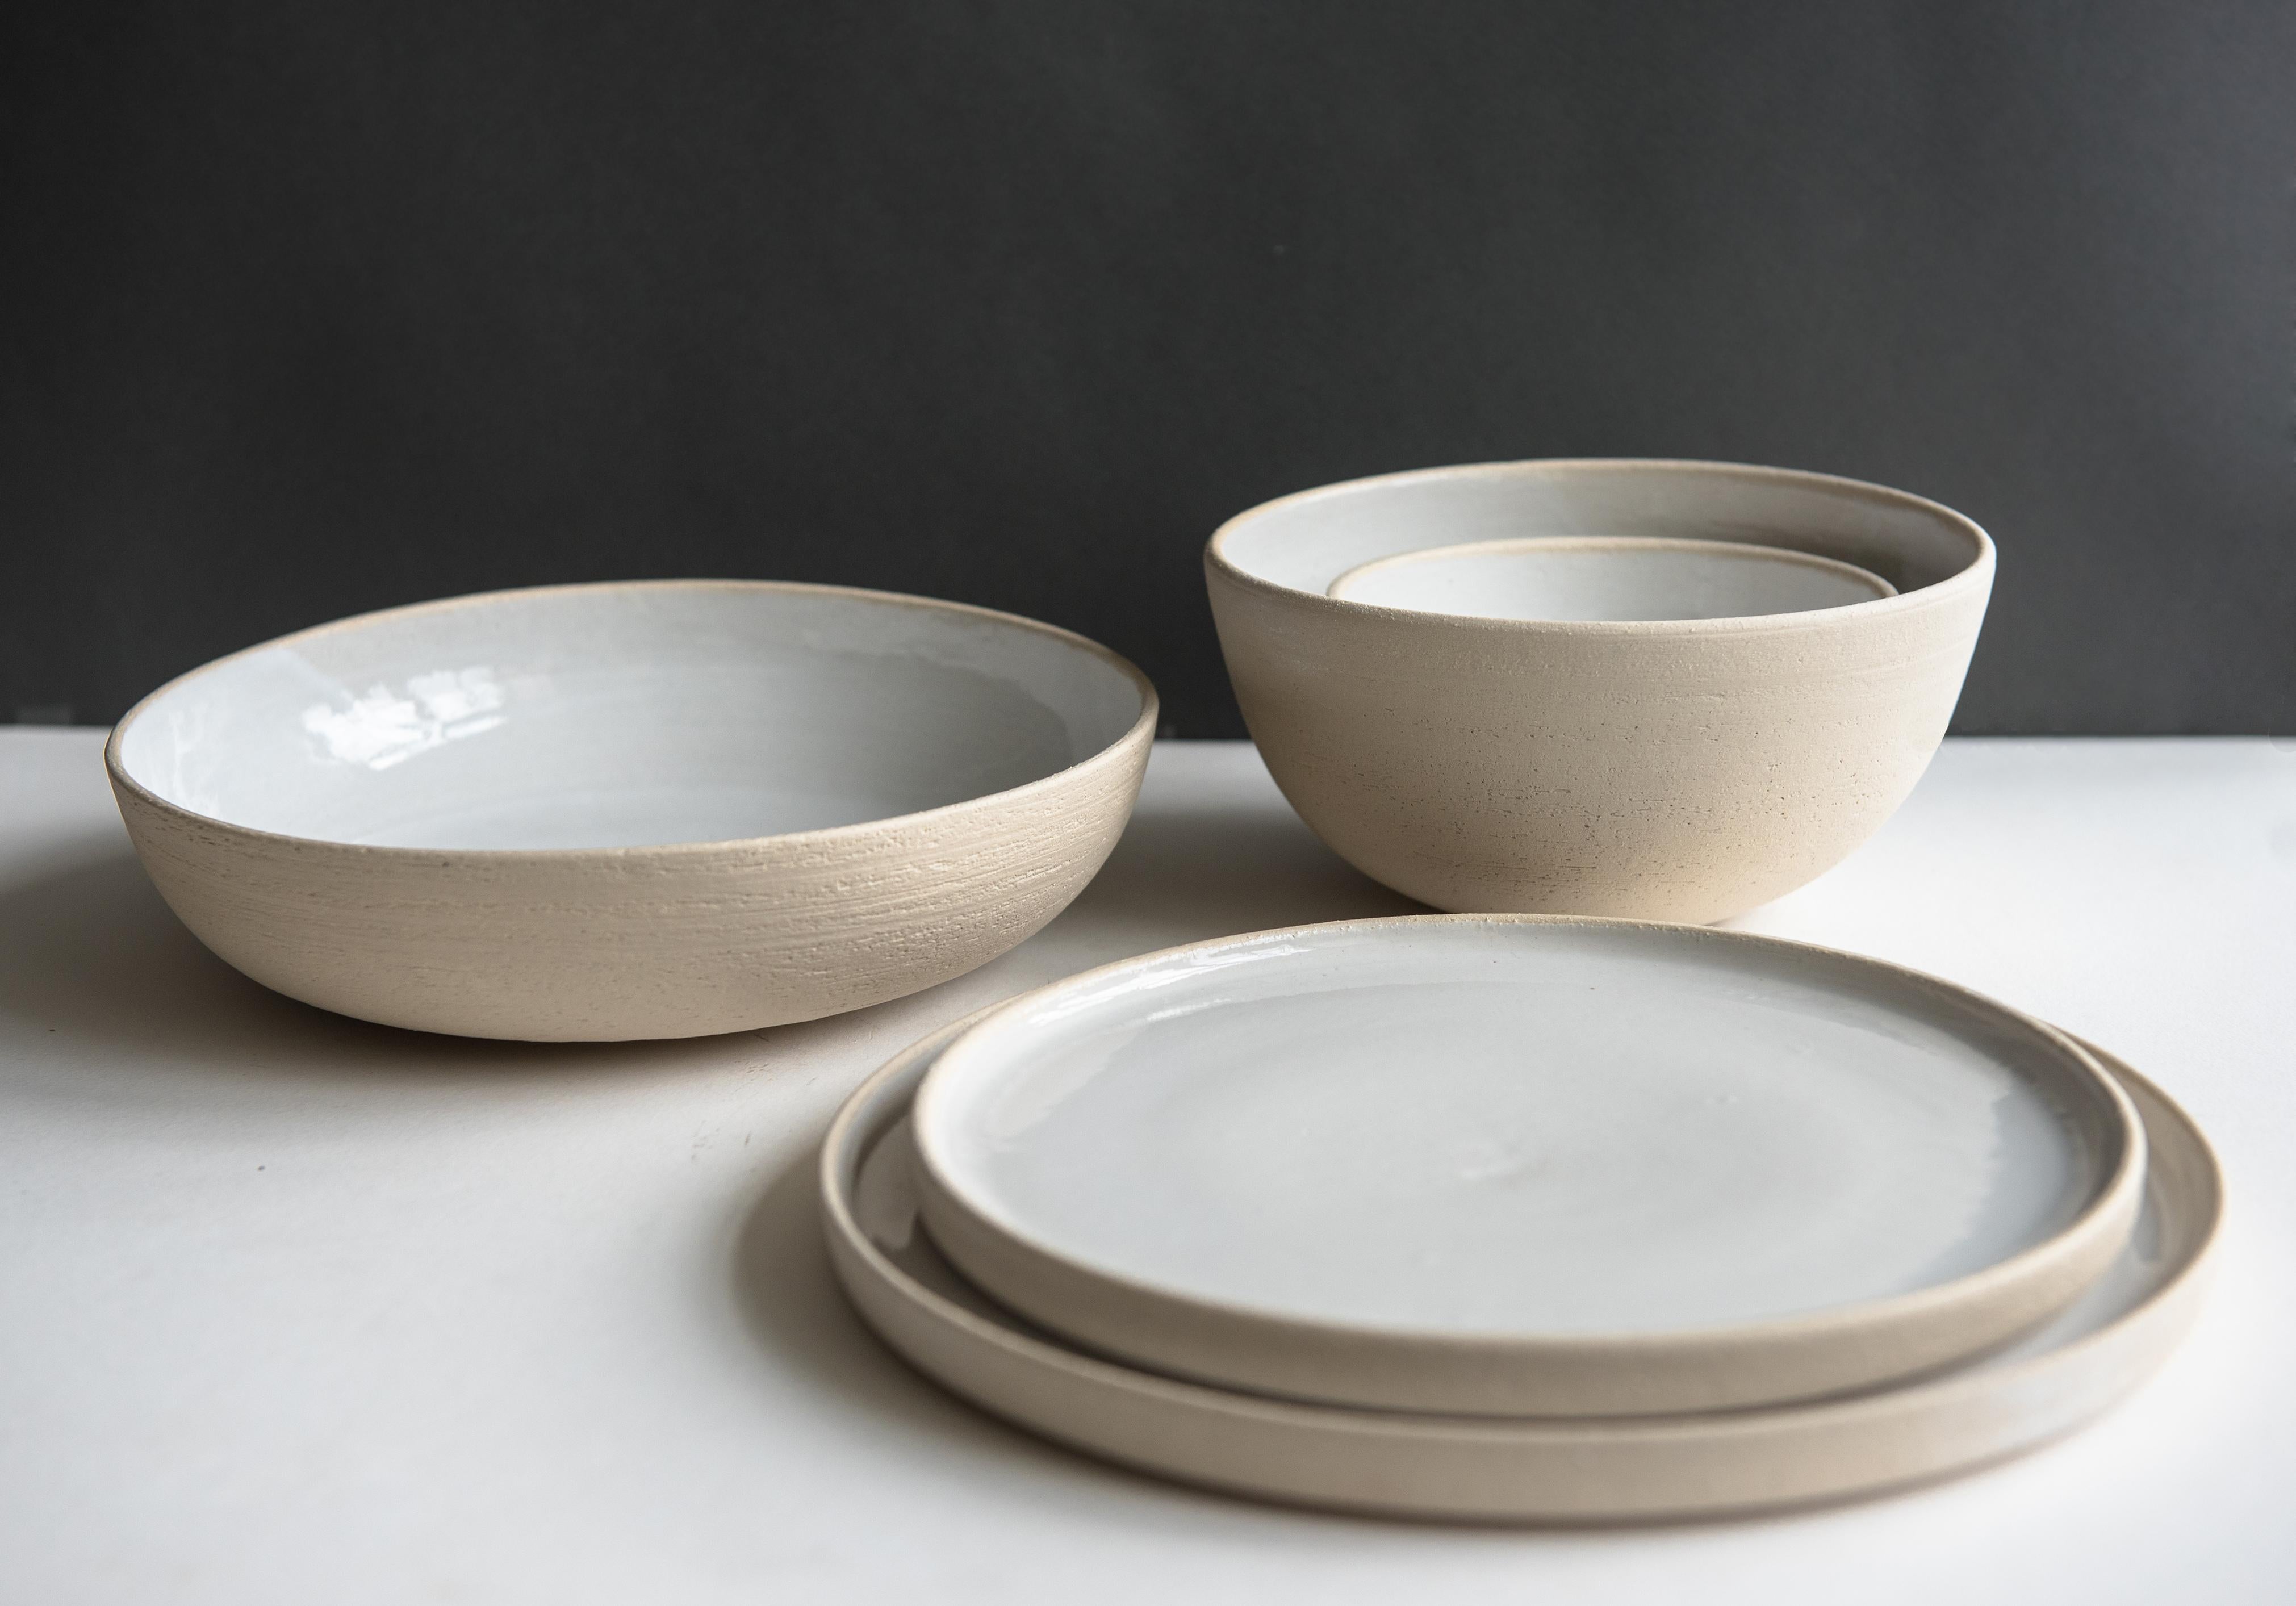 This is the most honest ceramic ware we have ever produced - exposed rough stoneware shows occasional signs of the artisans' fingers that were left during the hand-throwing process. The sides were smoothed but one can still see stoneware pores as if